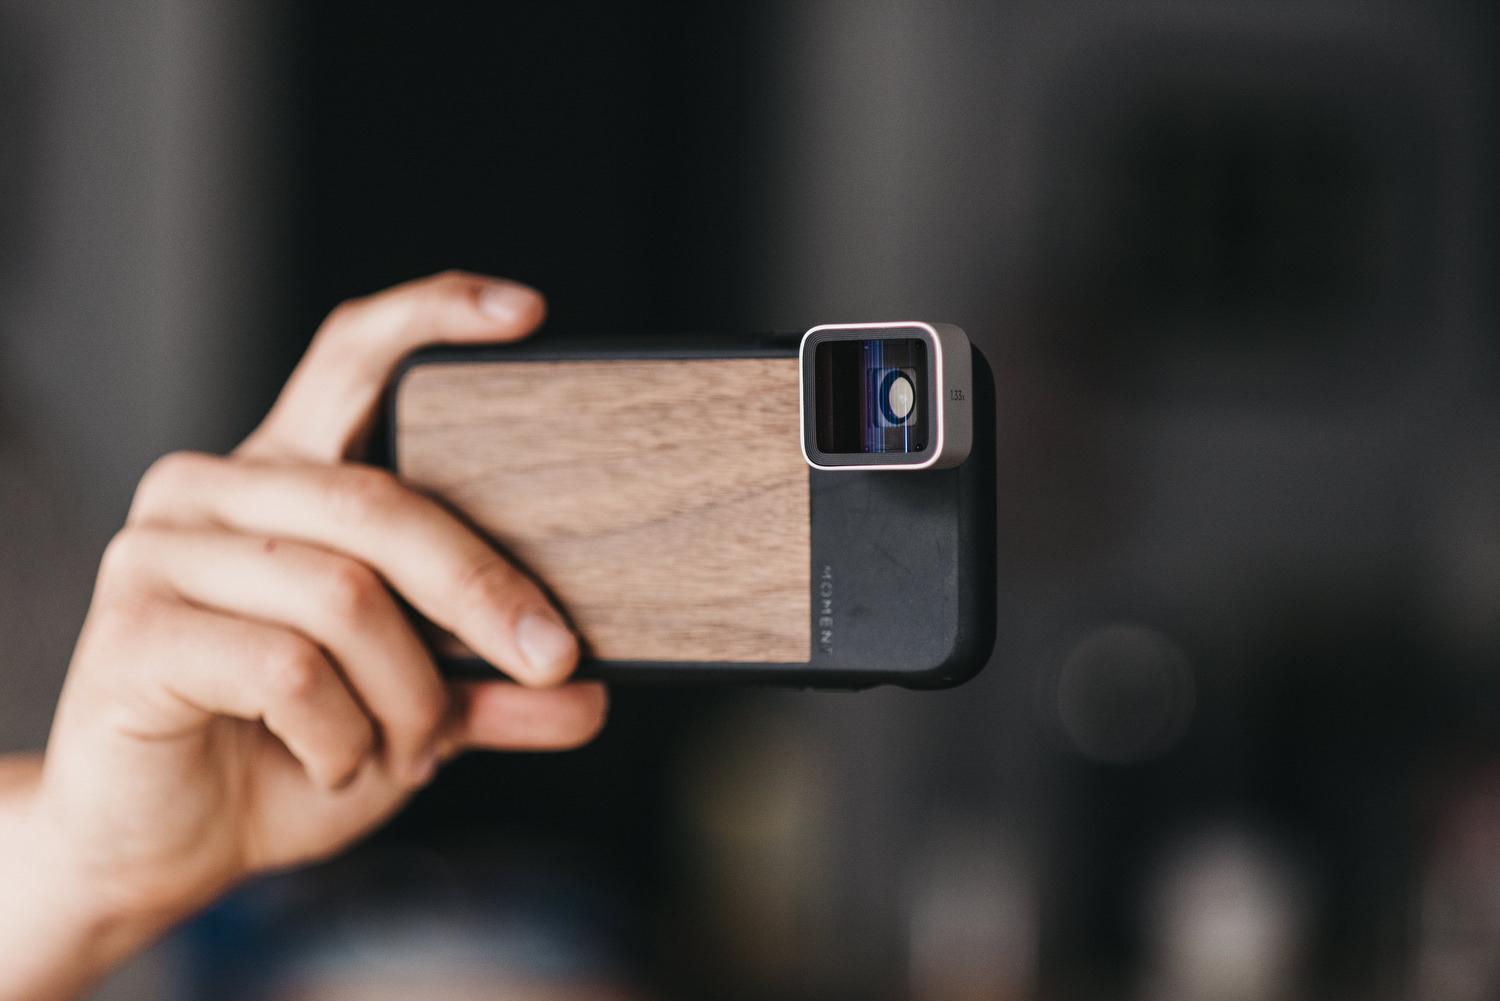 Galaxy Case - Holding up the Case in mid-air with an Anamorphic Lens.